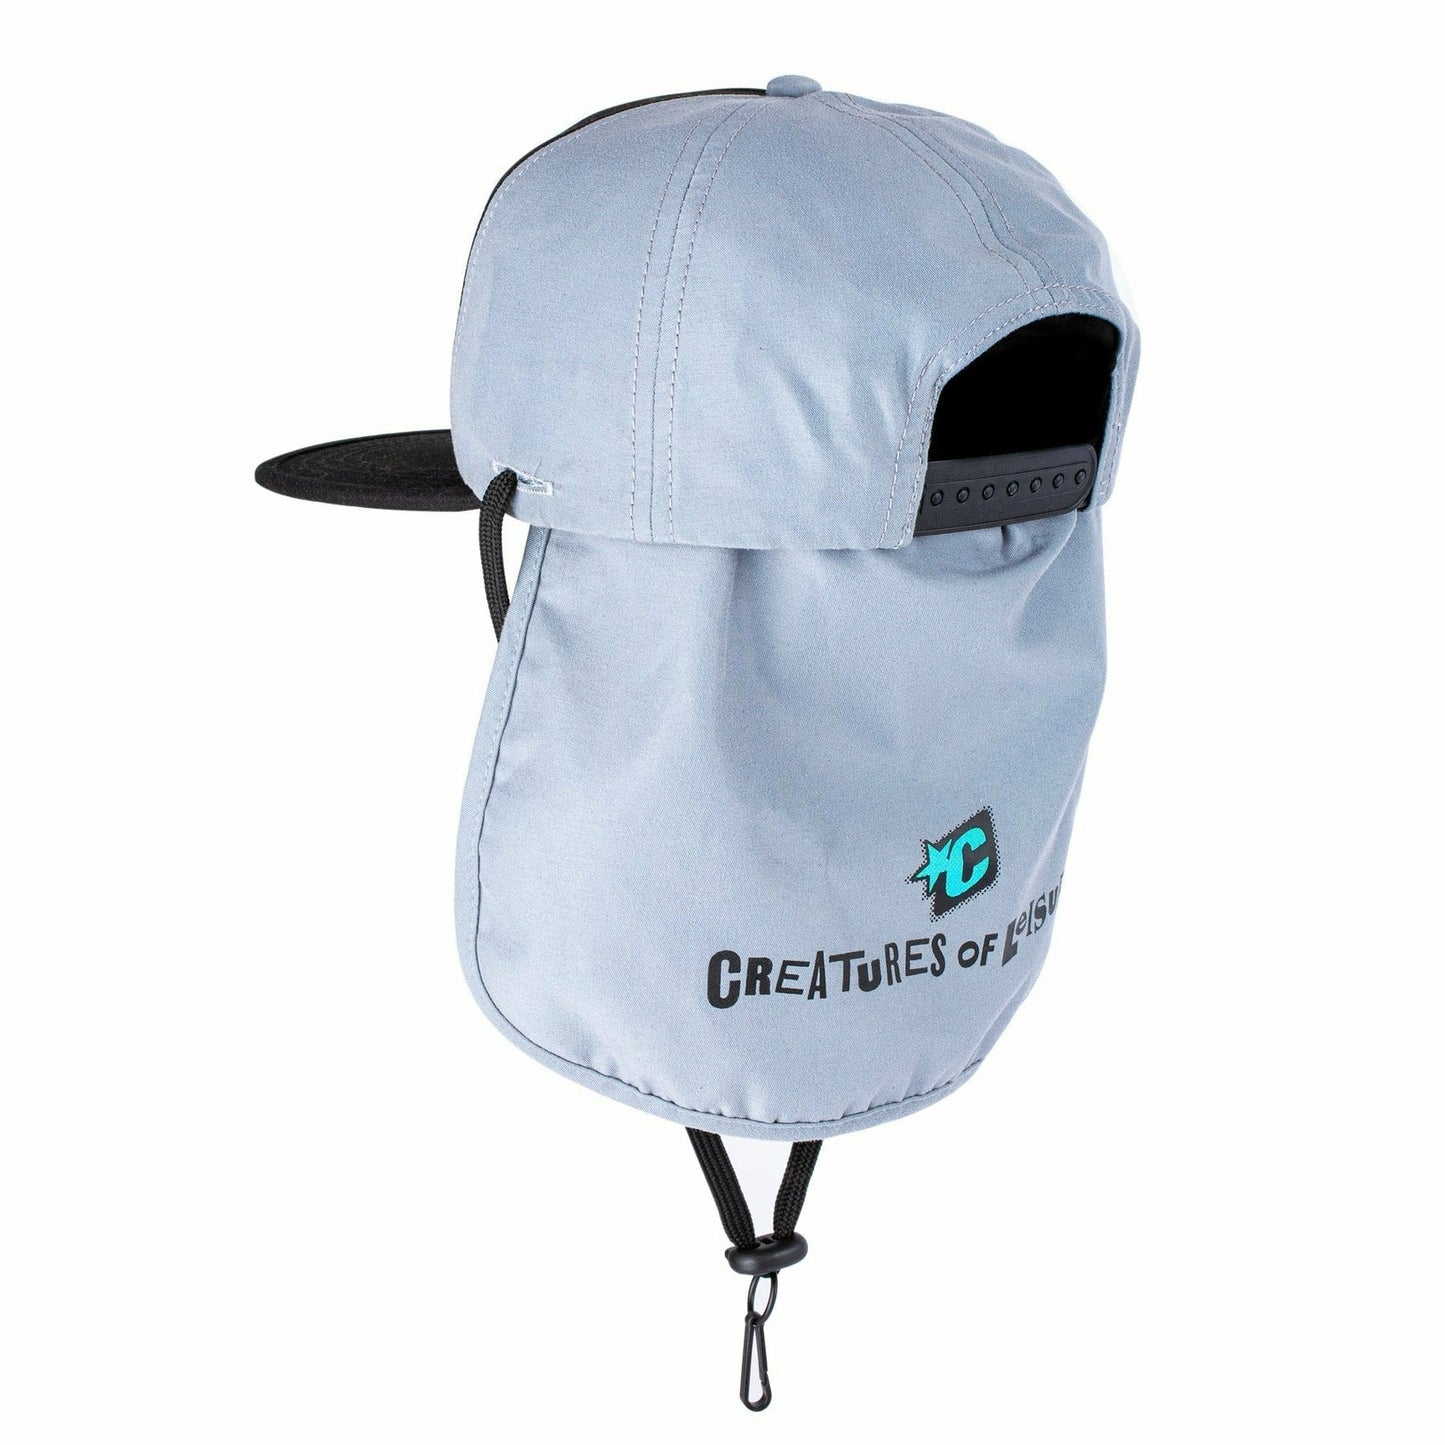 Creatures of Leisure - Reliance Grom Surf Cap